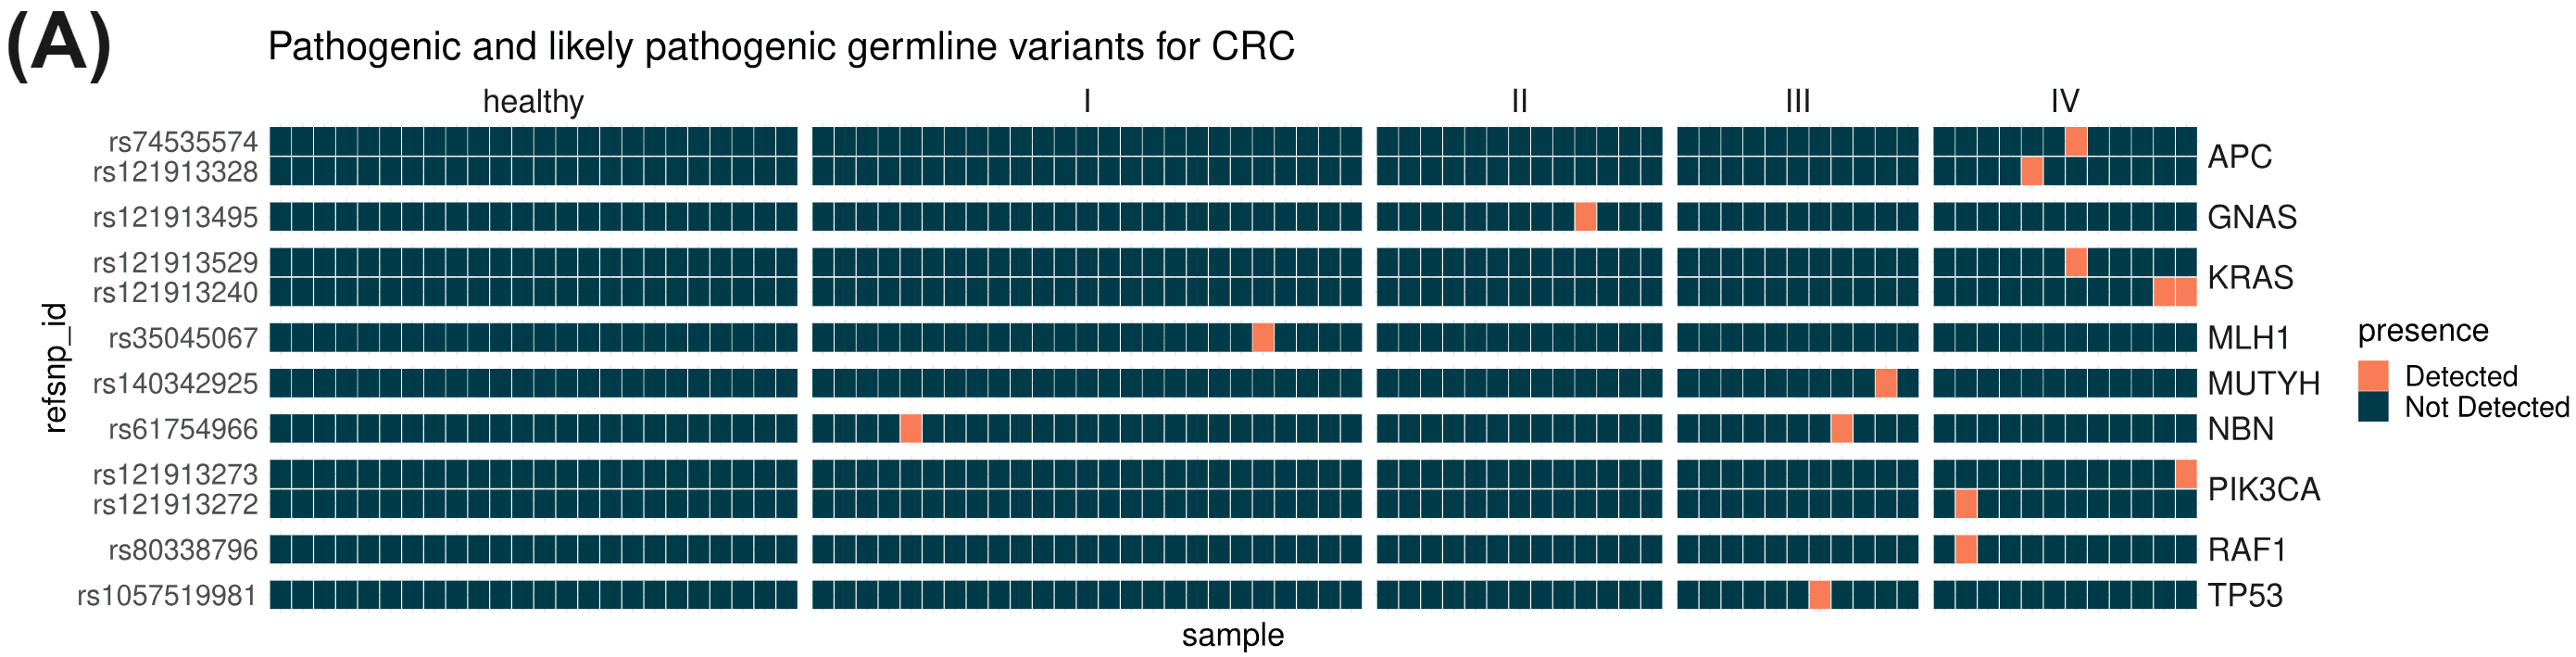 Germline variants identified in CRC cfDNA samples using duet evoC